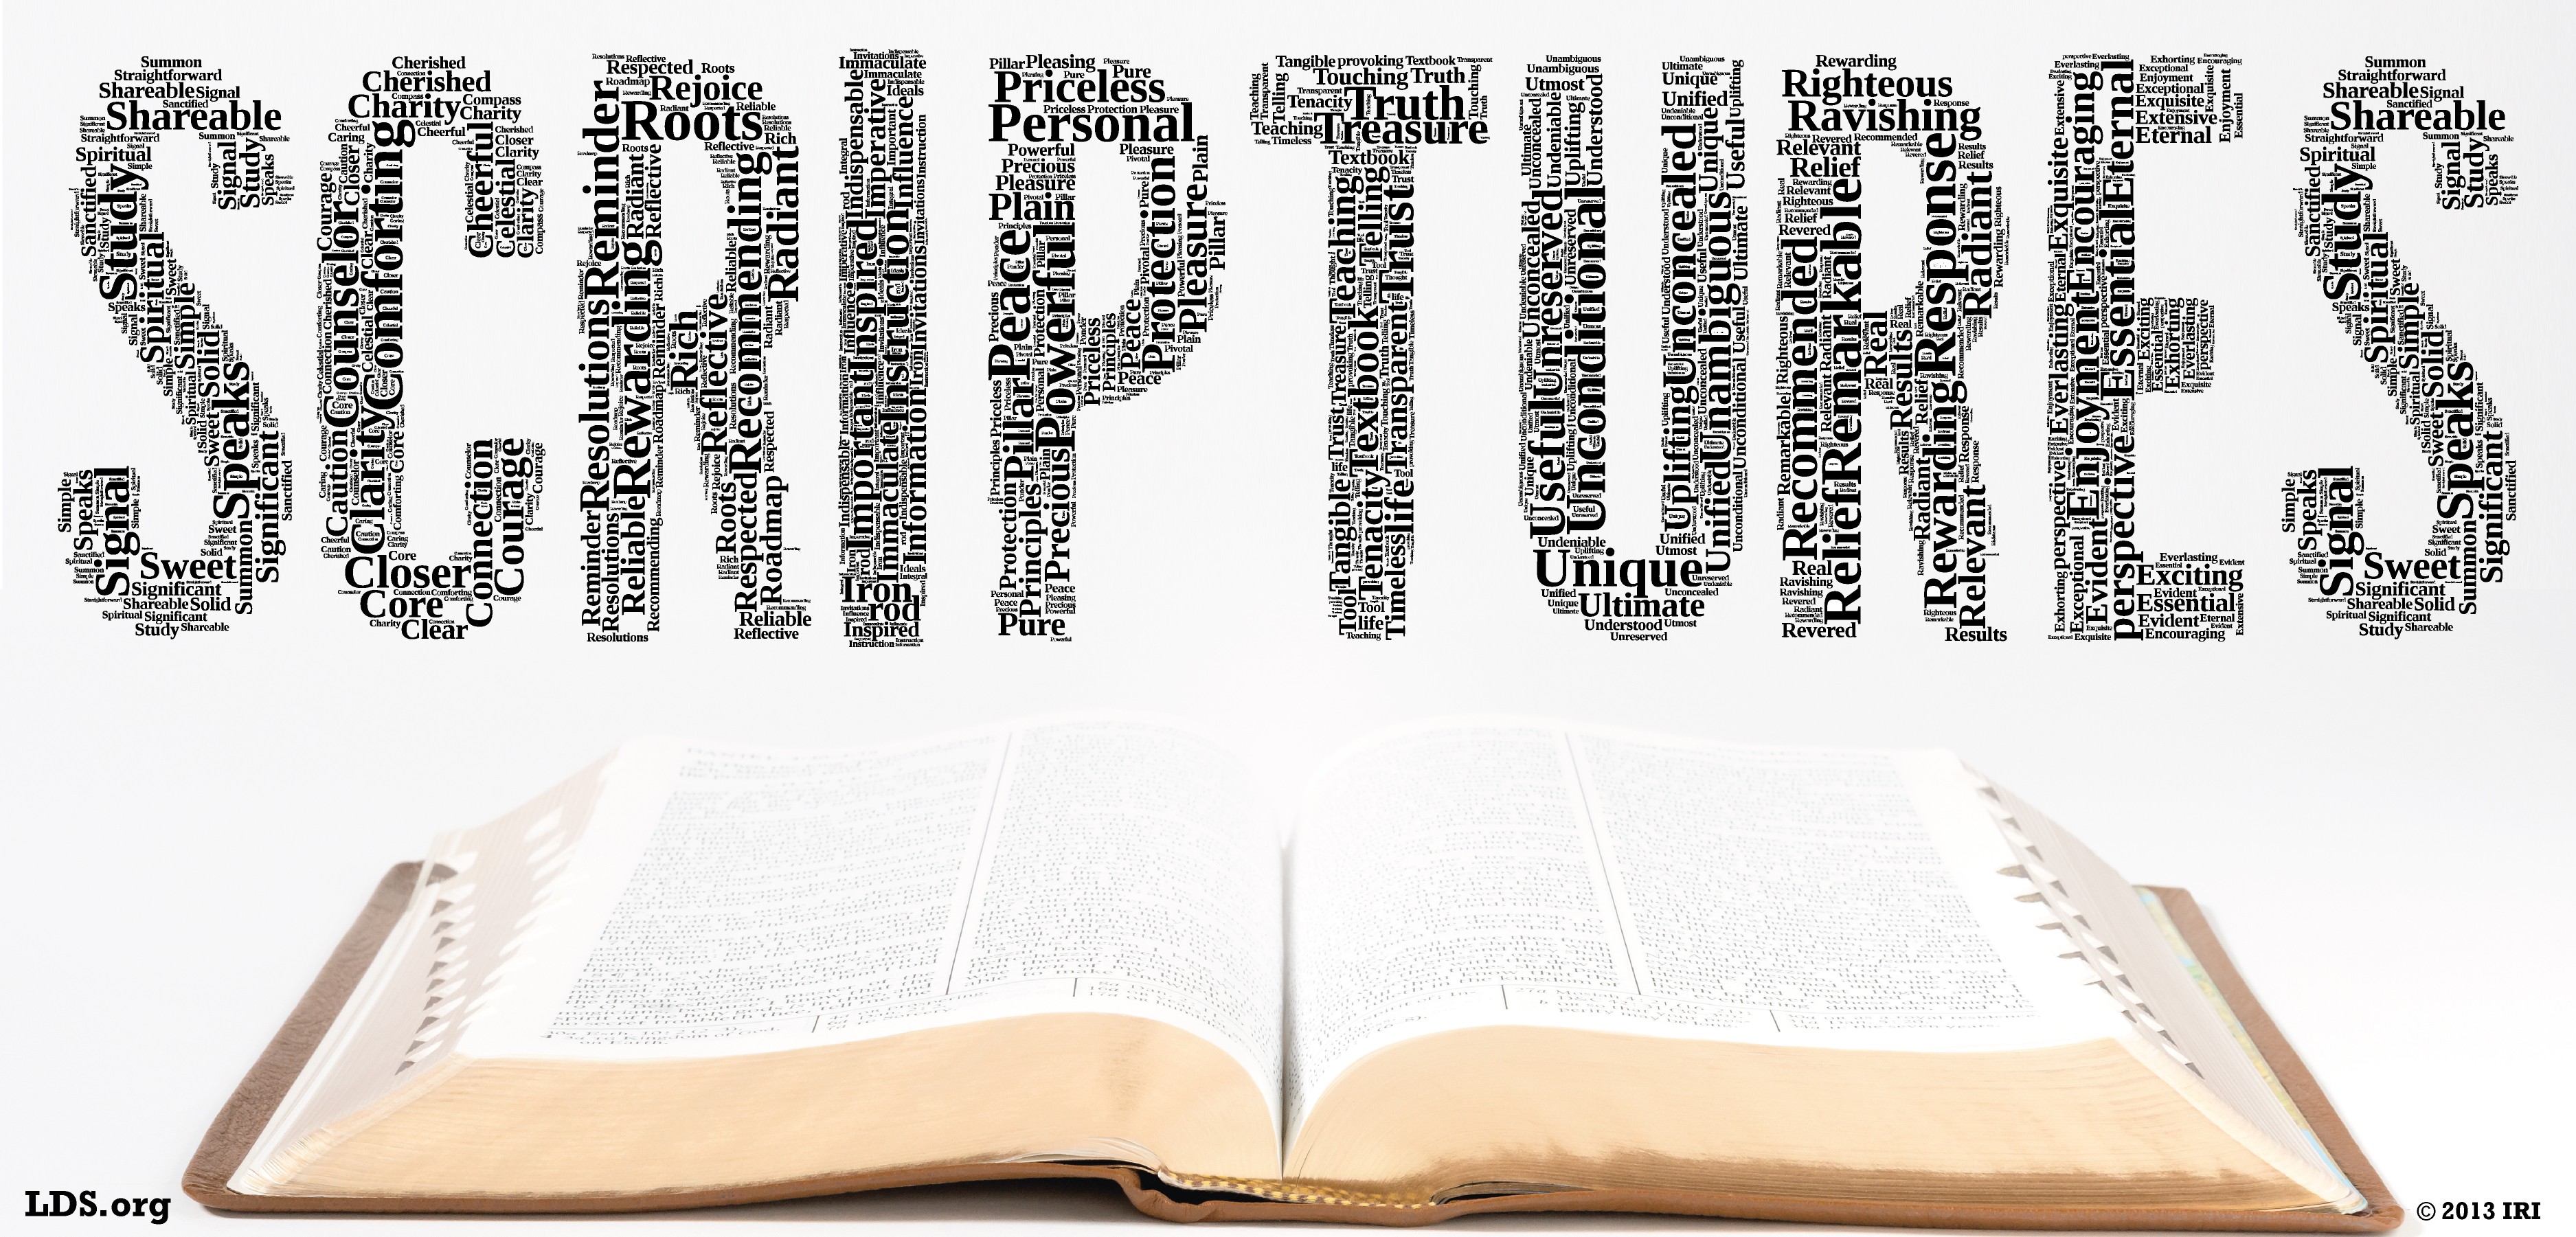 An image of the scriptures with the word “Scriptures” created by a word cloud overhead.